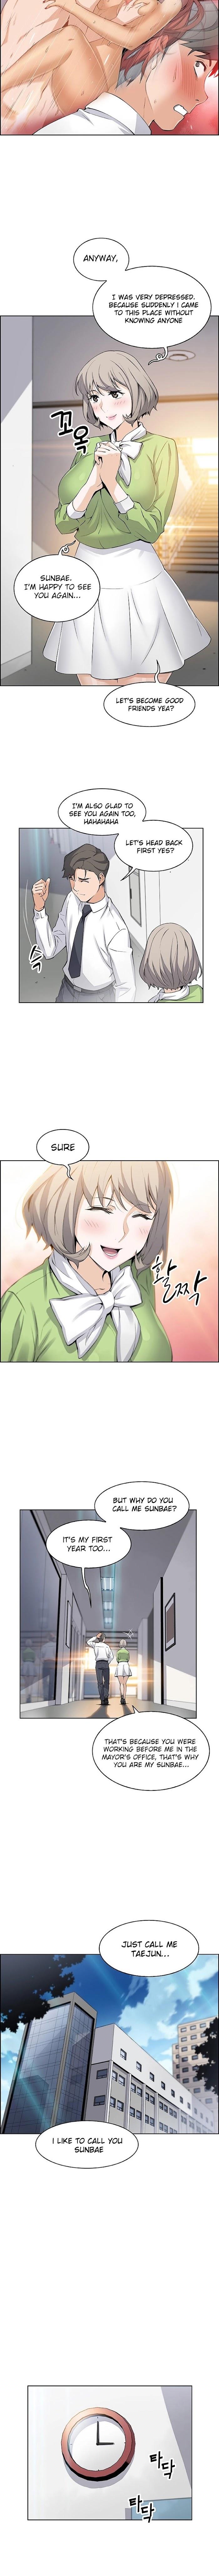 Housekeeper [Neck Pillow, Paper] Ch.49/49 [English] [Manhwa PDF] Completed 154